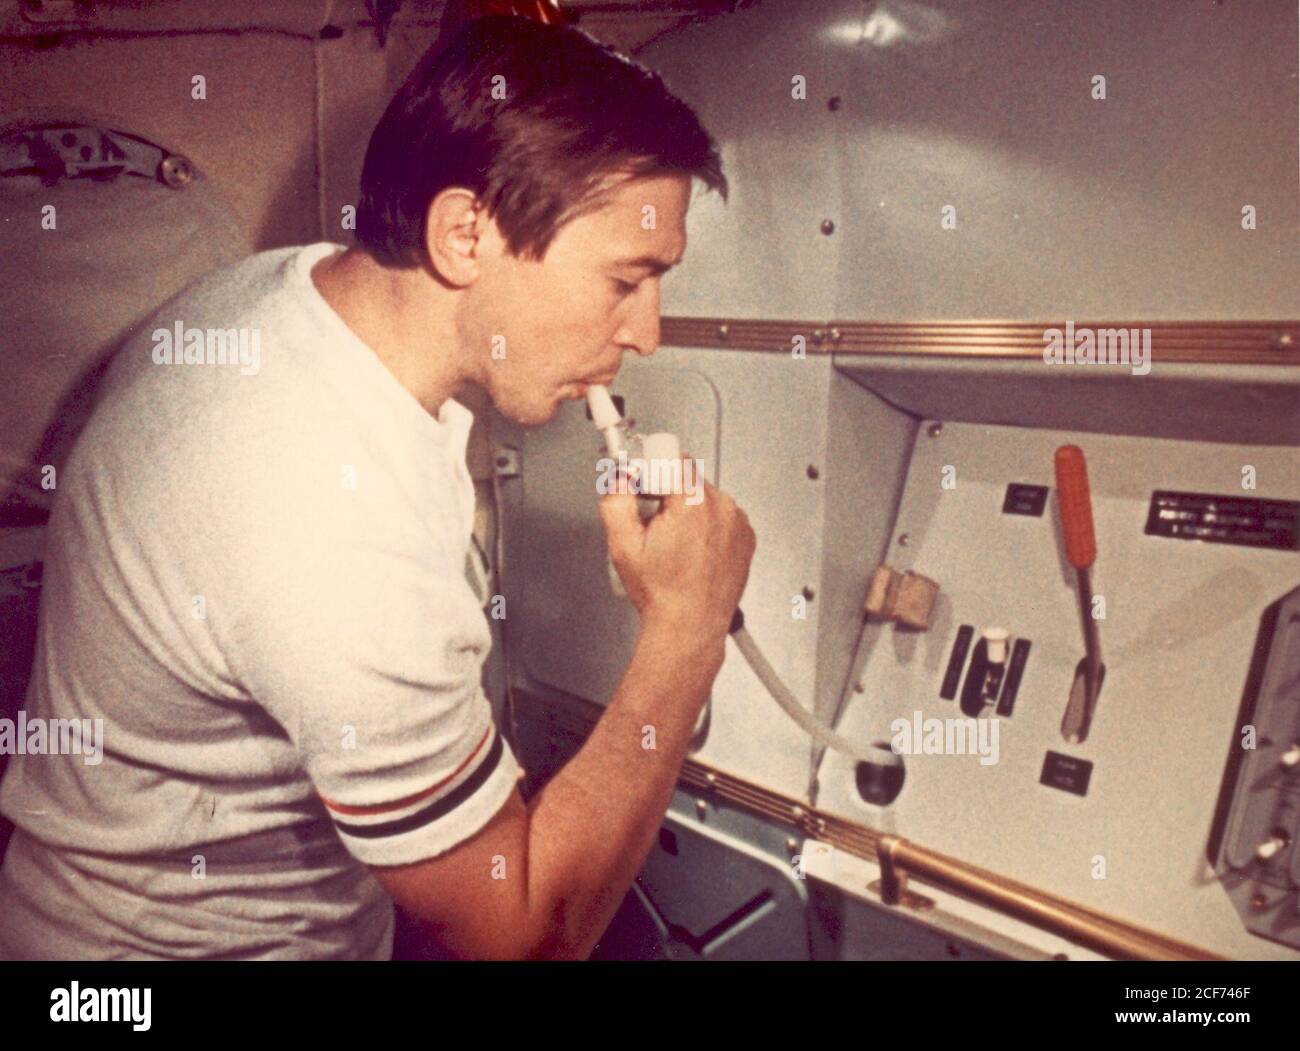 An interior view of the orbital module of a Soviet Soyuz spacecraft mock-up, located at the Cosmonaut Training Center (Star City) near Moscow. This view shows a Soviet test engineer drinking from a water dispenser. The orbital module is one of three major components of the Soyuz spacecraft. The other two components are the descent vehicle and the instrument assembly module. This photograph was made from a frame of the 35mm motion picture film entitled 'Checkout of the Compatibility of Equipment in the Soyuz Spacecraft Mock-up Stock Photo